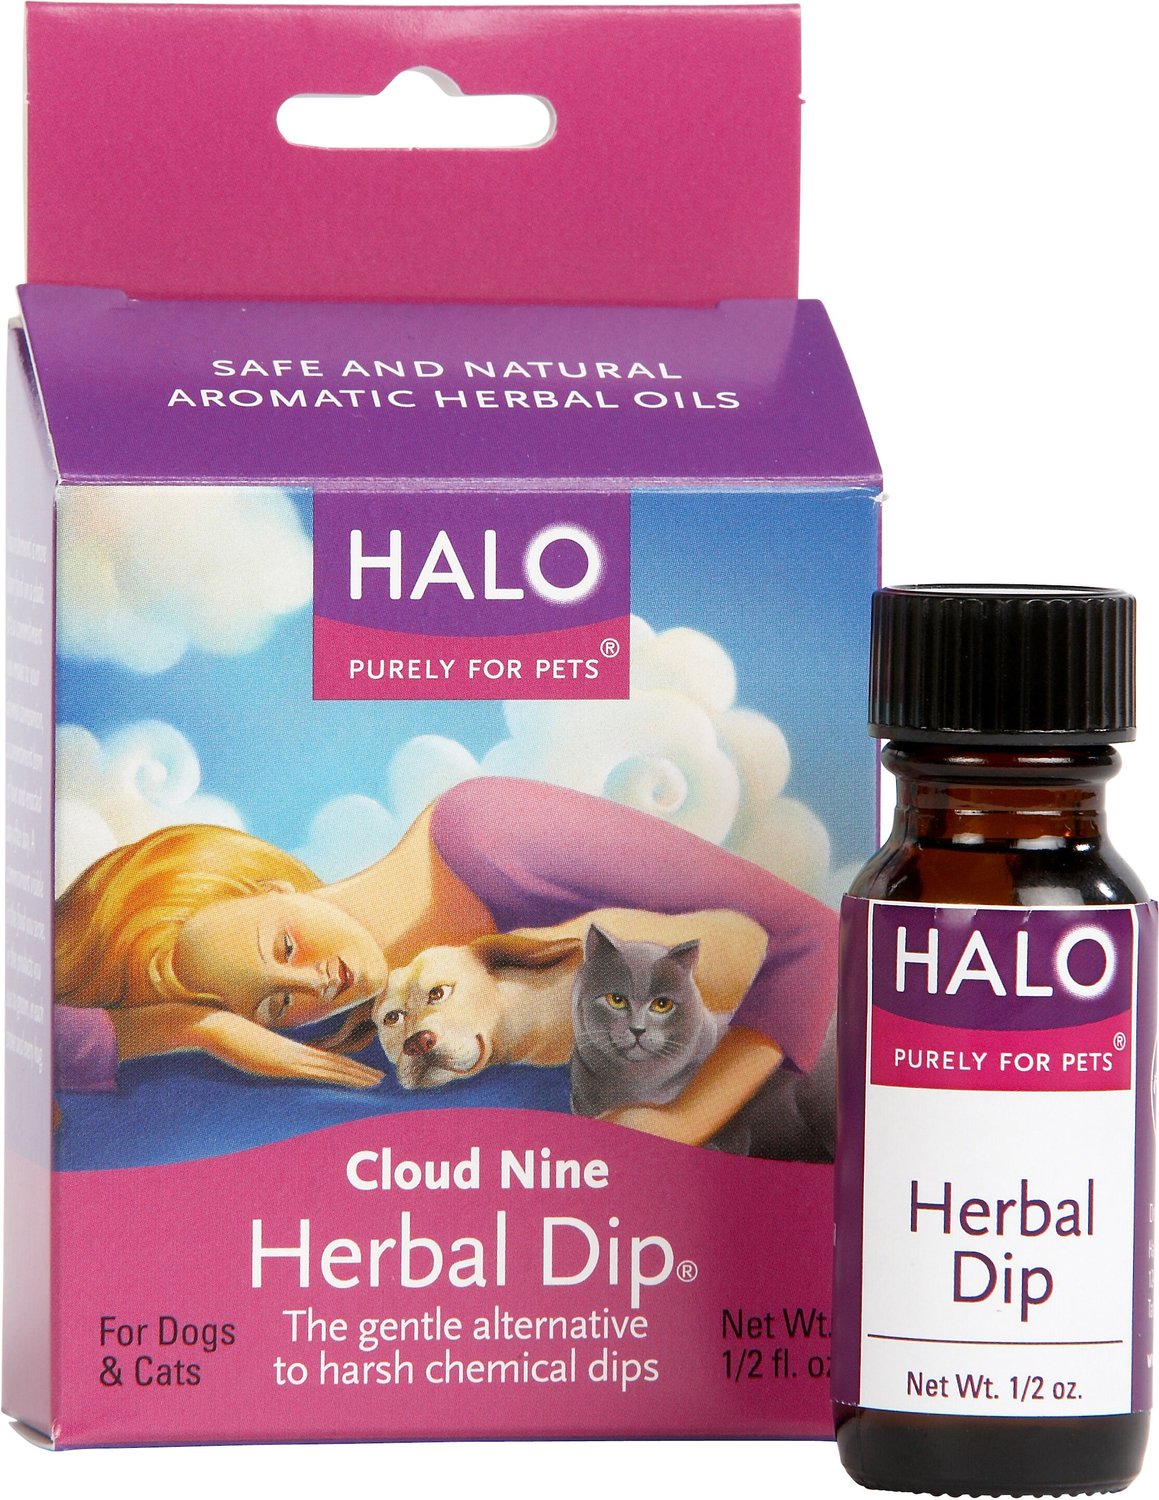 Halo Cloud 9 Herbal Dip for Dogs & Cats